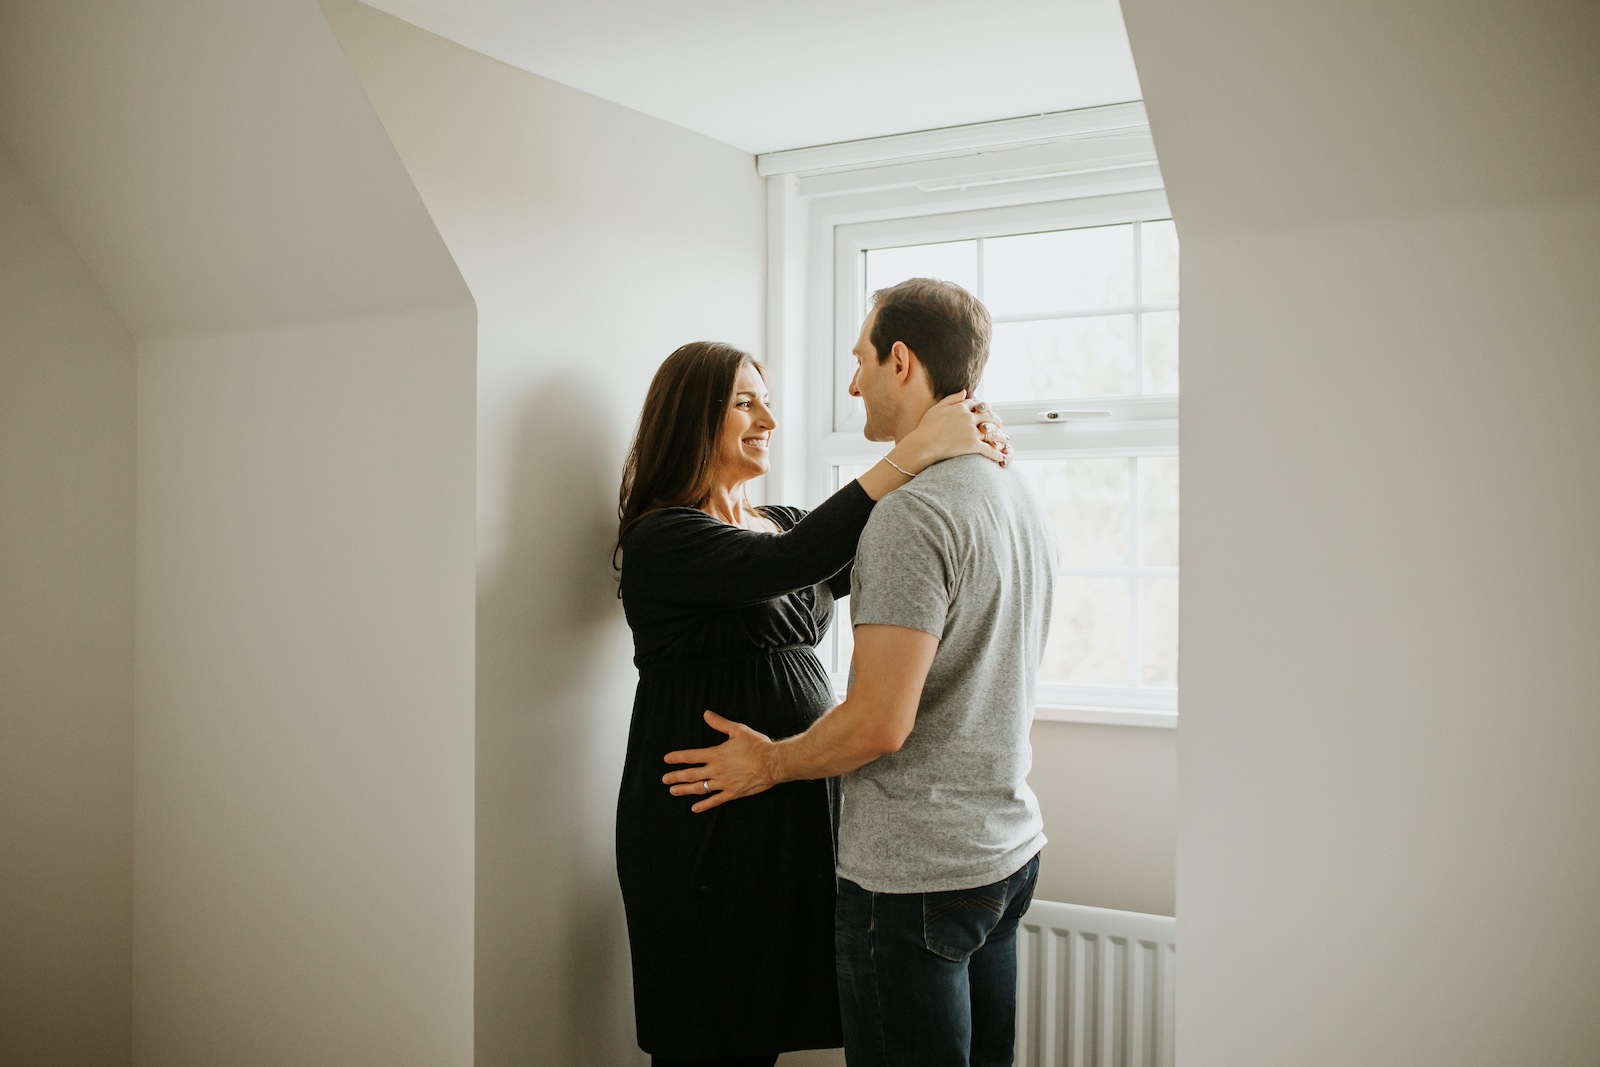 Mum and dad to be standing by bedroom window smiling at each other during pregnancy photoshoot - at home maternity photoshoot